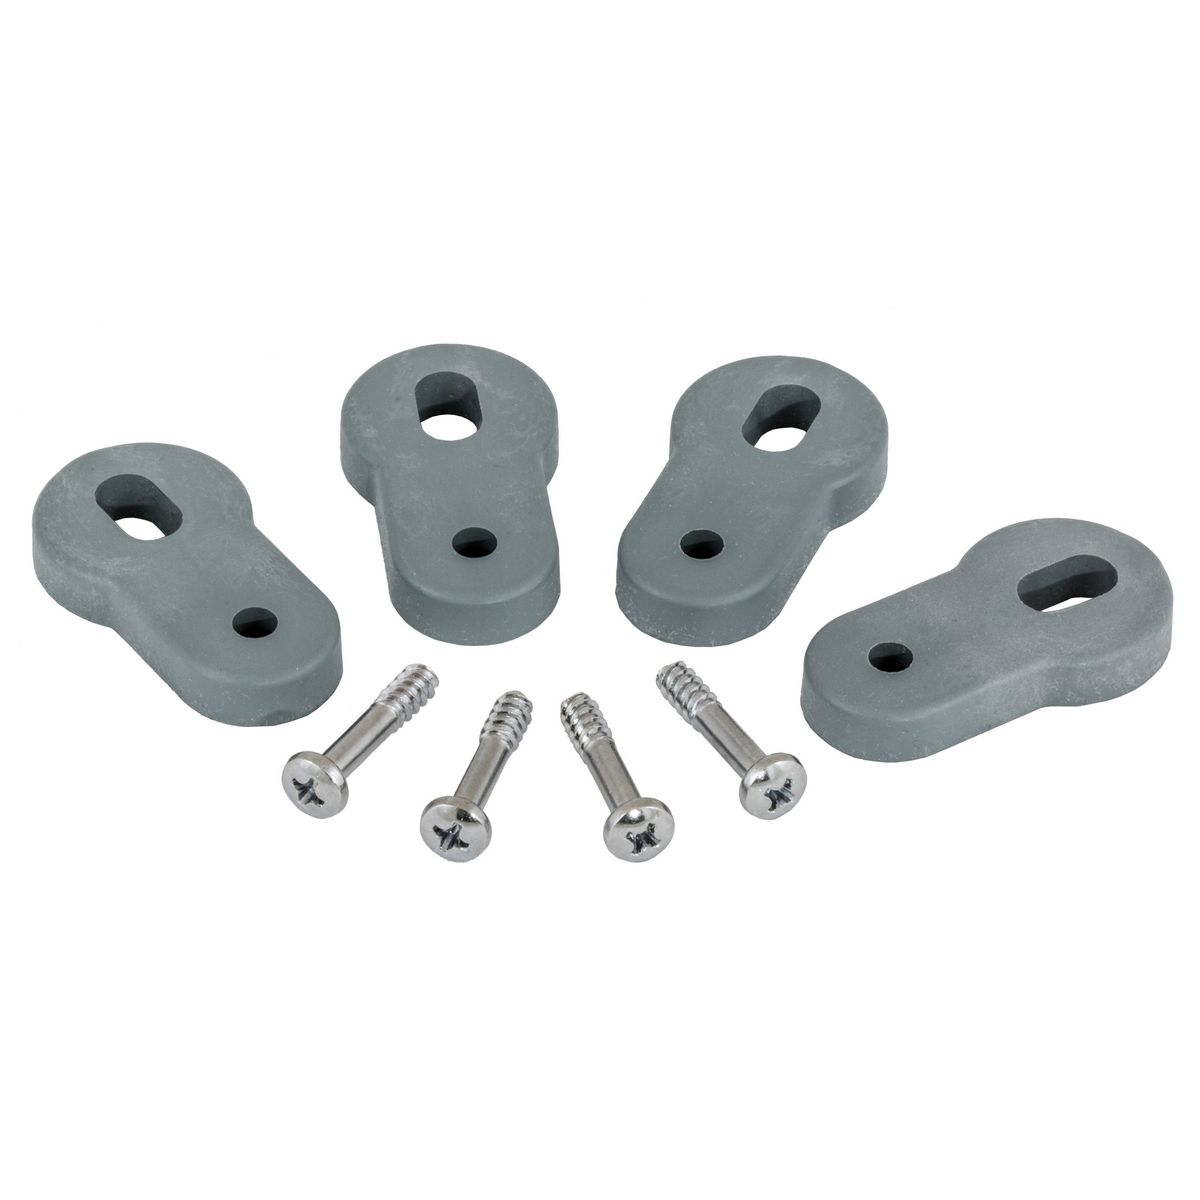 REPL MOUNTING FEET FOR HBLDS3, 10PK